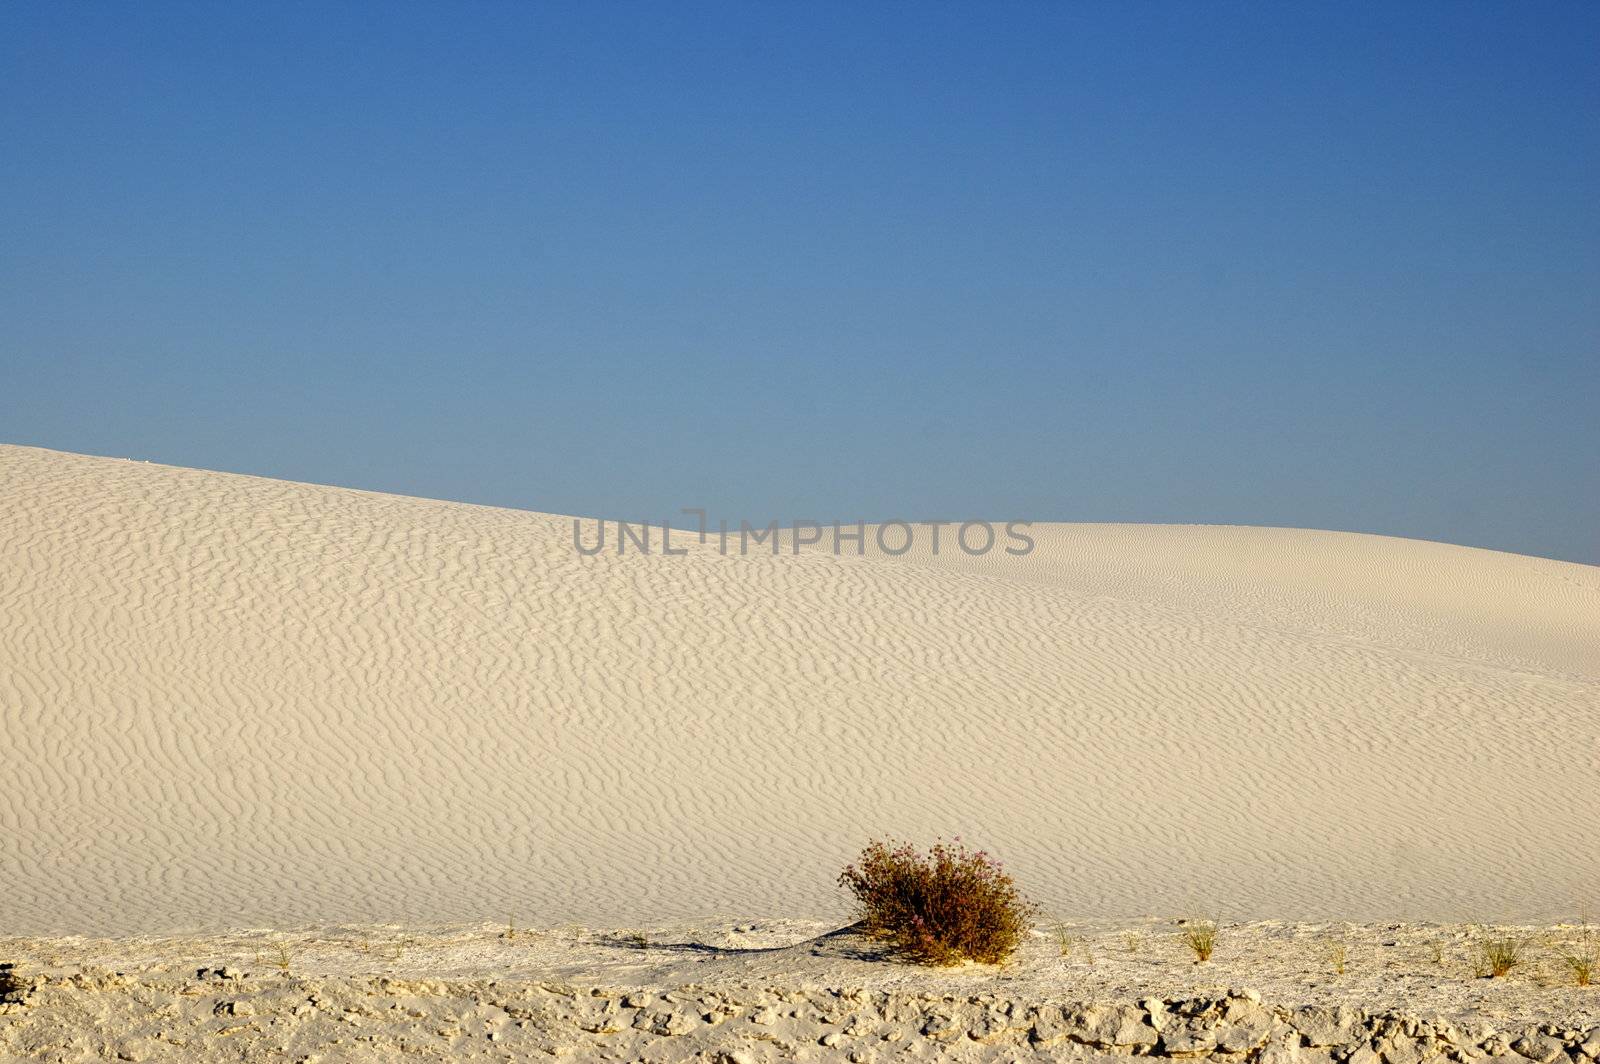 White Sands National Monument at sunset, featuring a desert plant, hills and dunes against the horizon, New Mexico